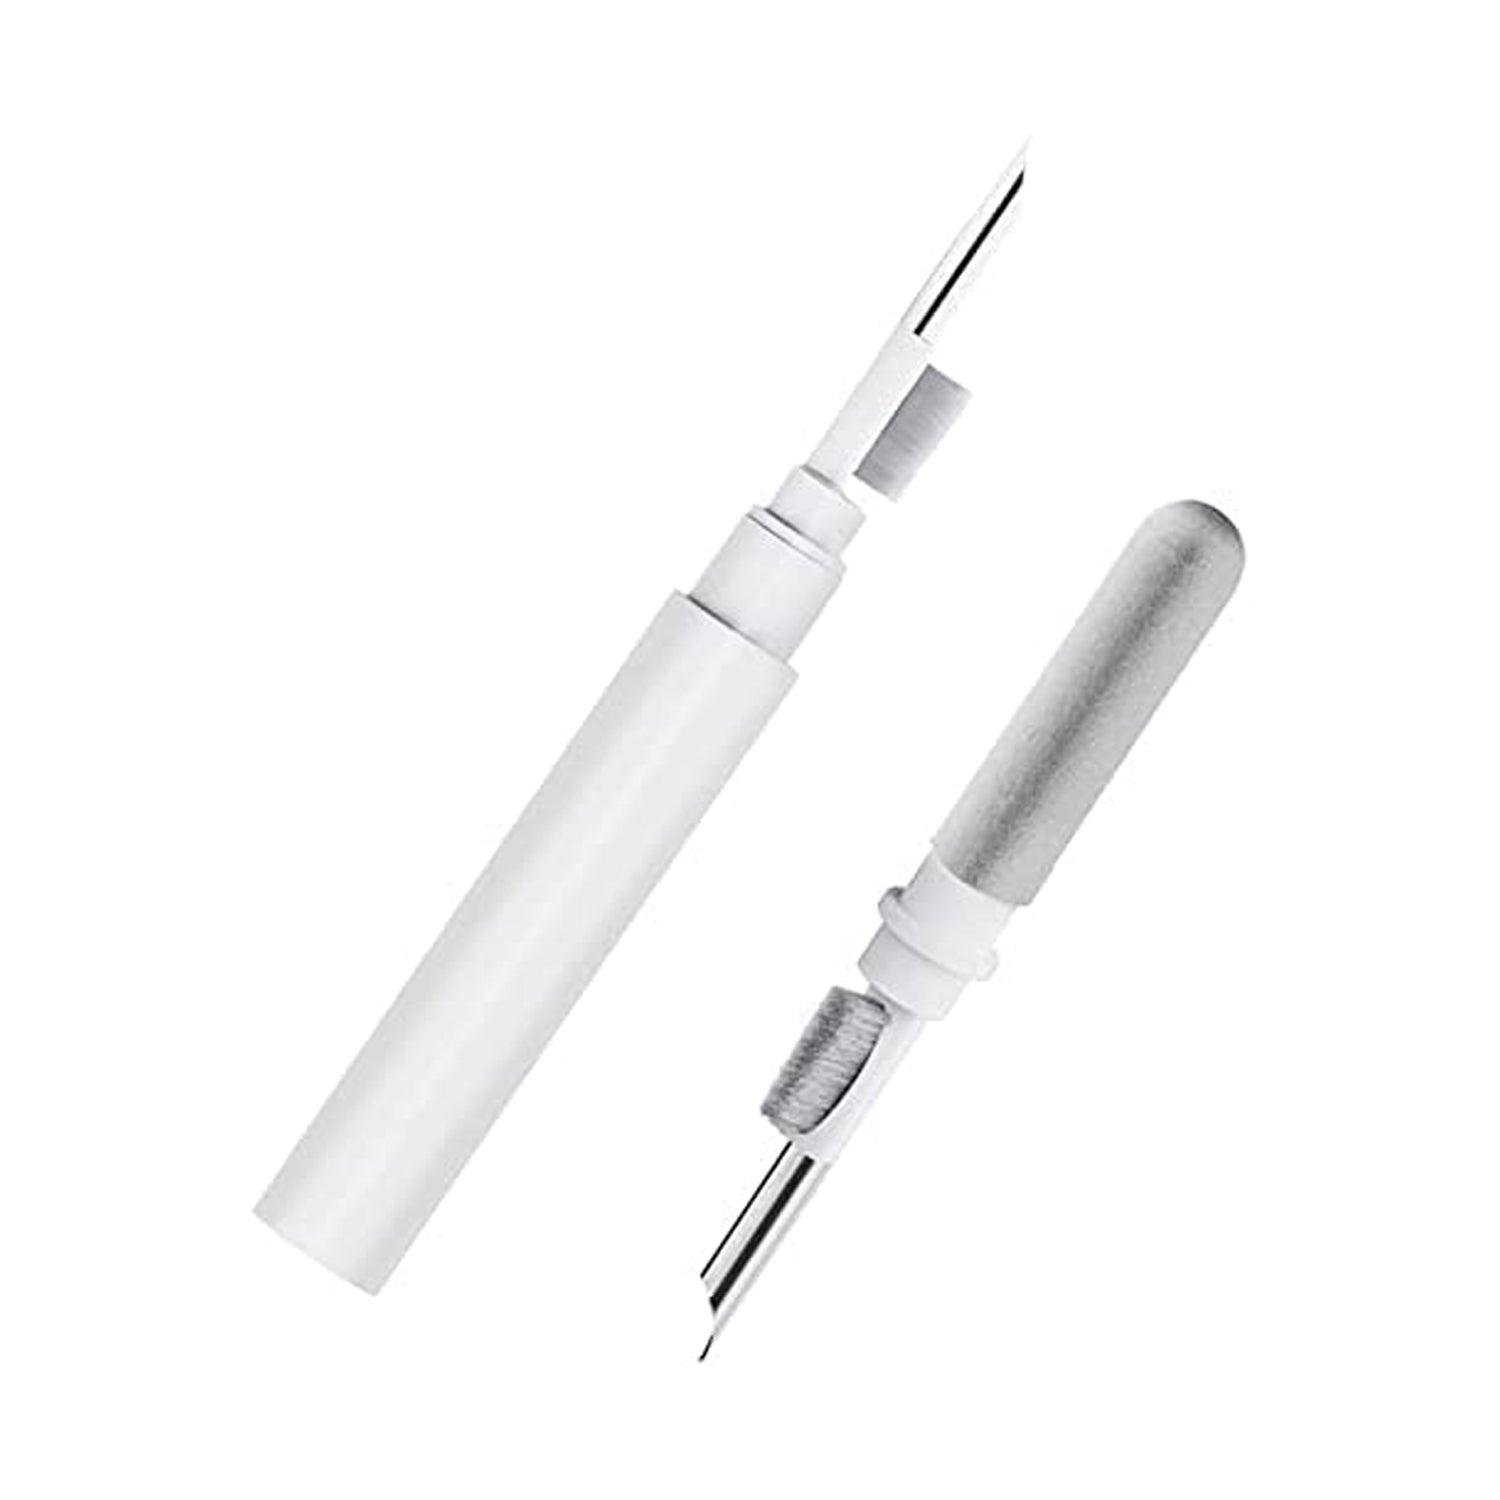 6188 3 In 1 Earbuds Cleaning Pen For Cleaning Of Ear Buds And Ear Phones Easily Without Having Any Damage. 